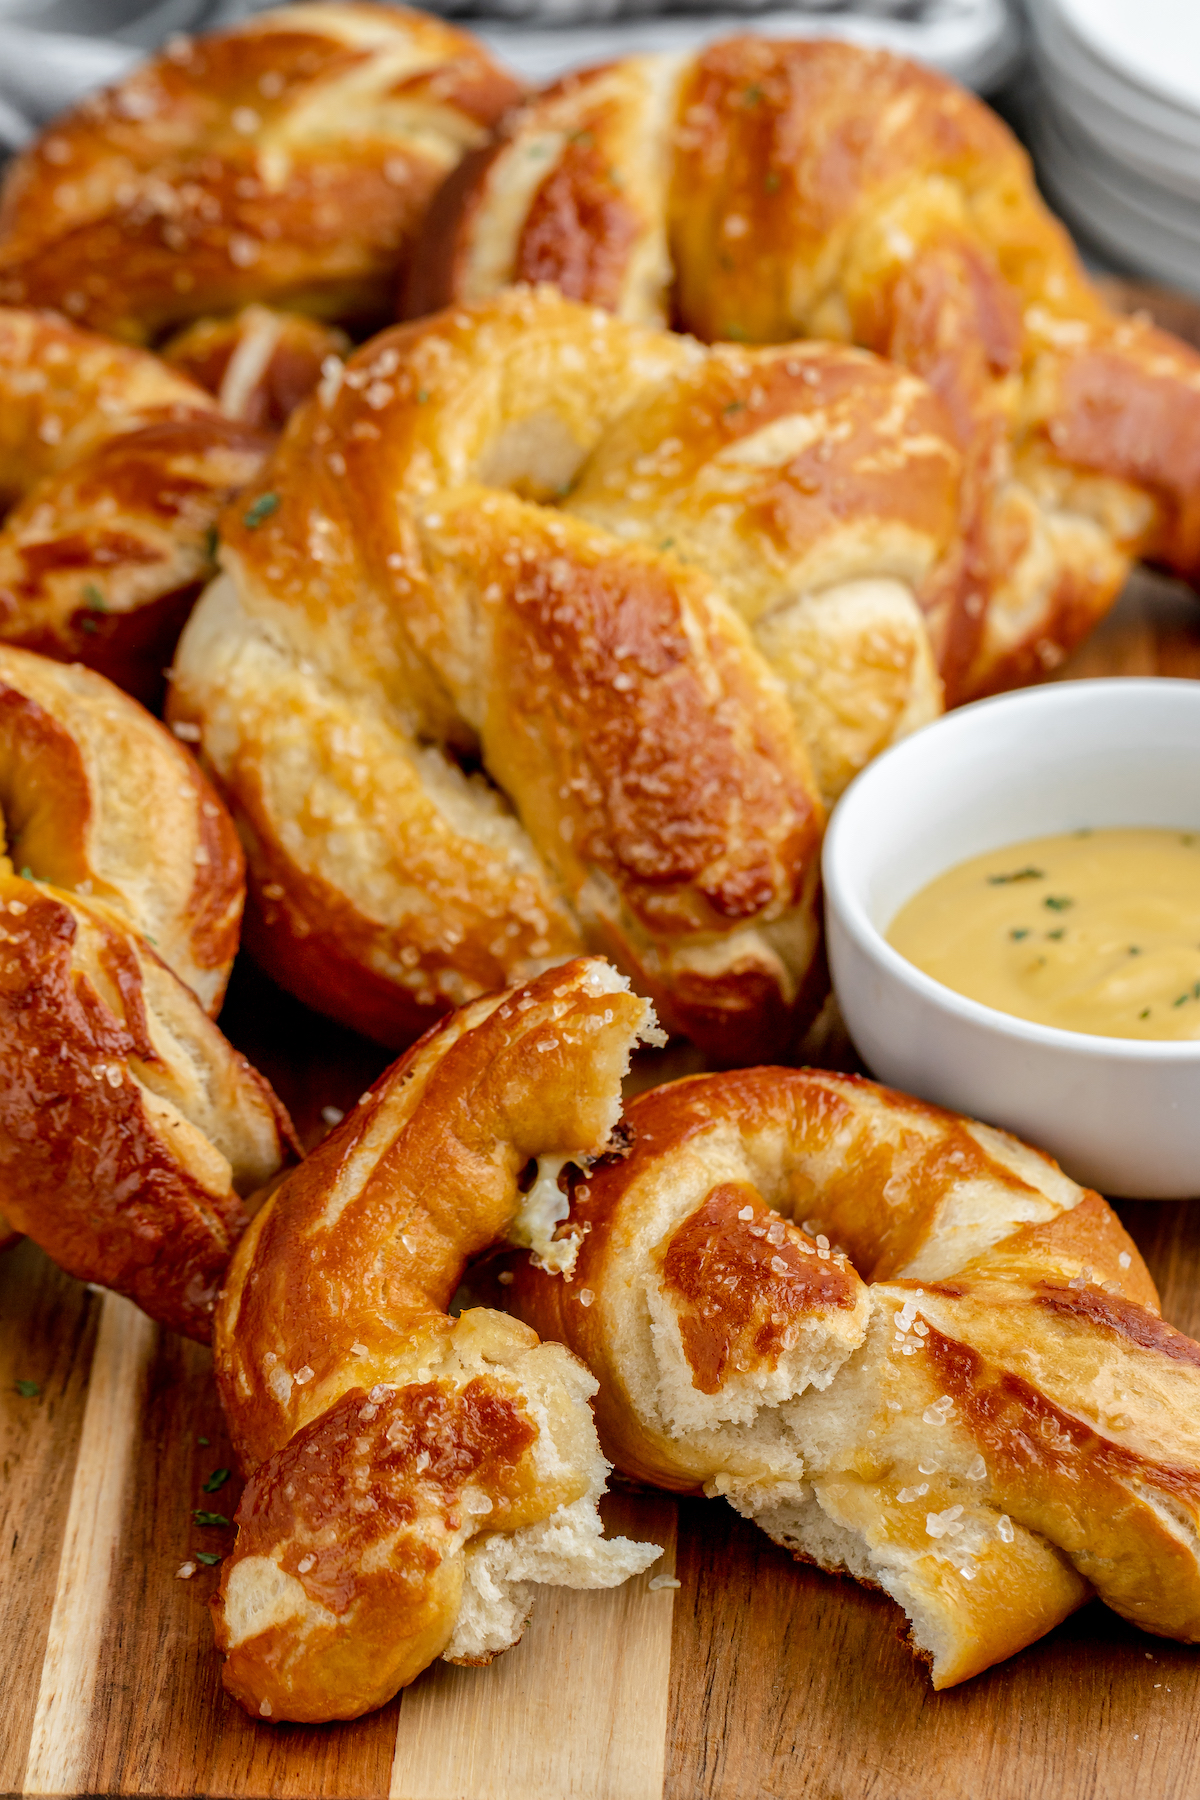 Pretzels piled around a small cup of dipping sauce. One pretzel is broken in half to show texture.